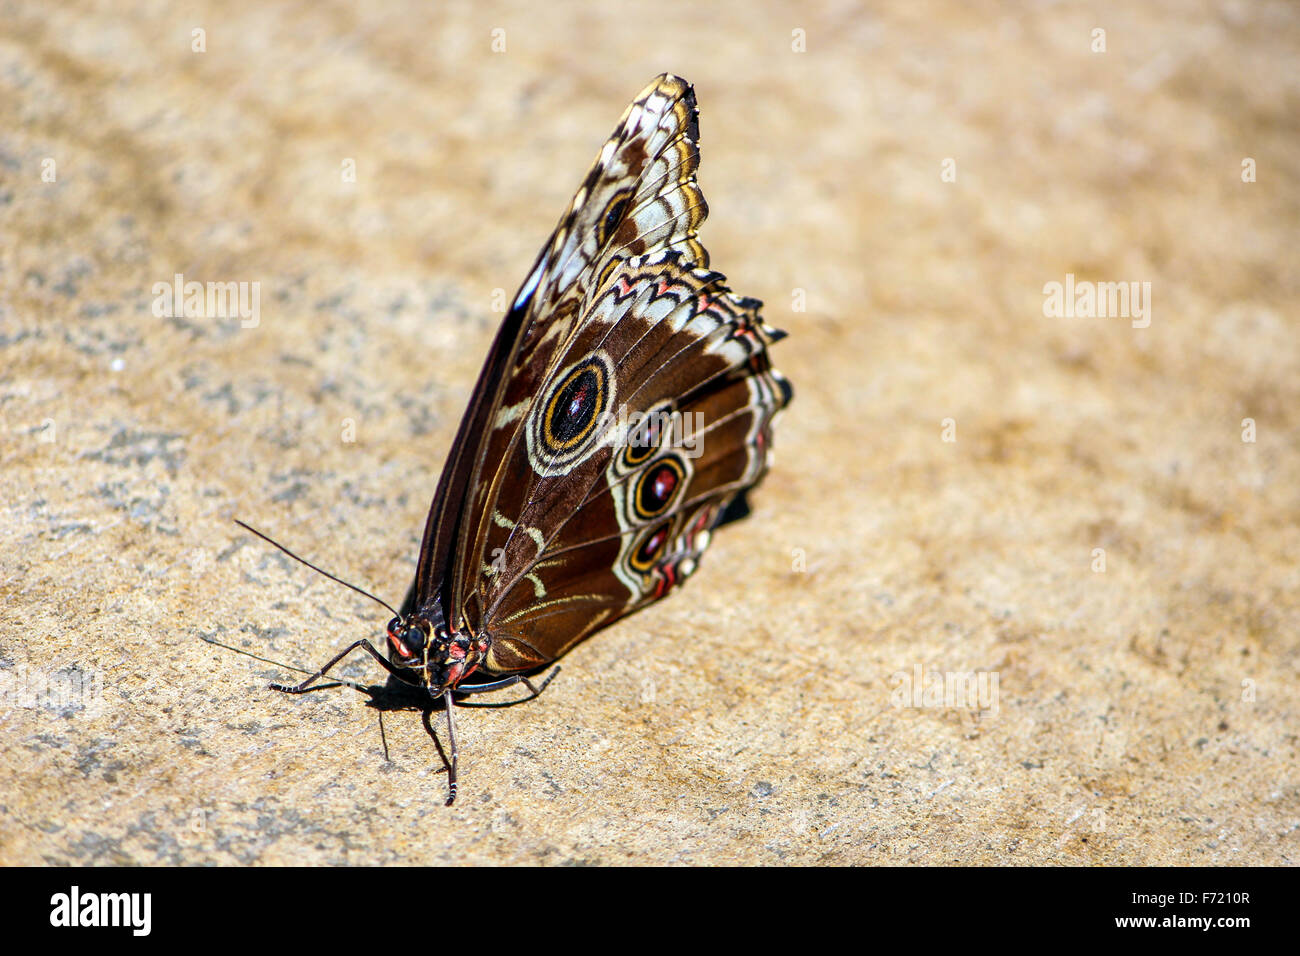 Butterfly sitting or resting on a rock Stock Photo